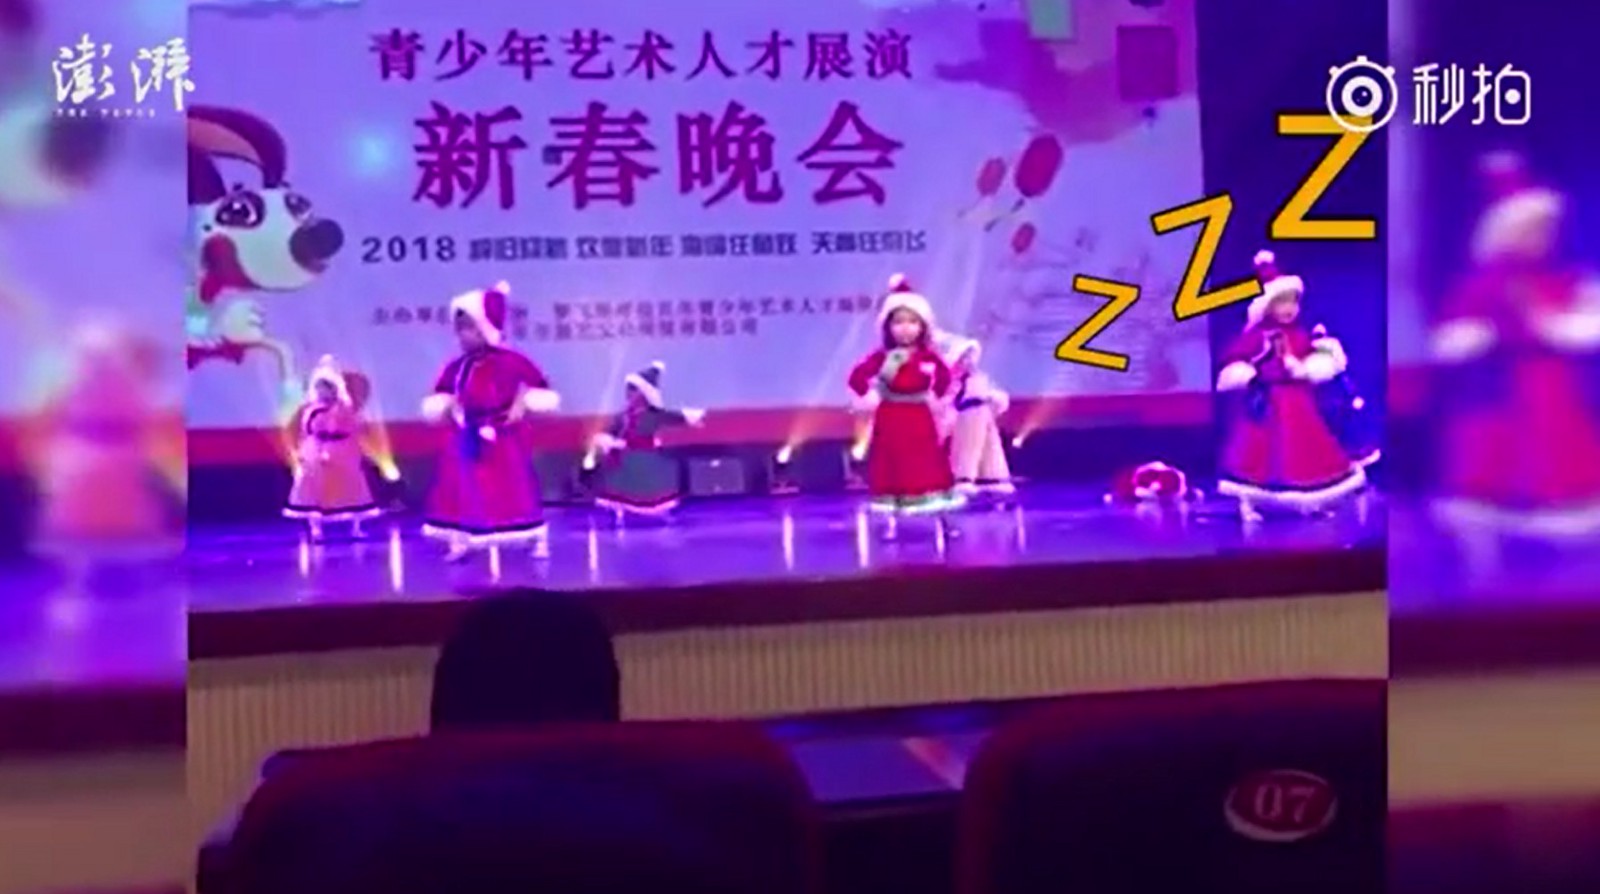 Trending: Little Girl Falls Asleep While Performing on Stage